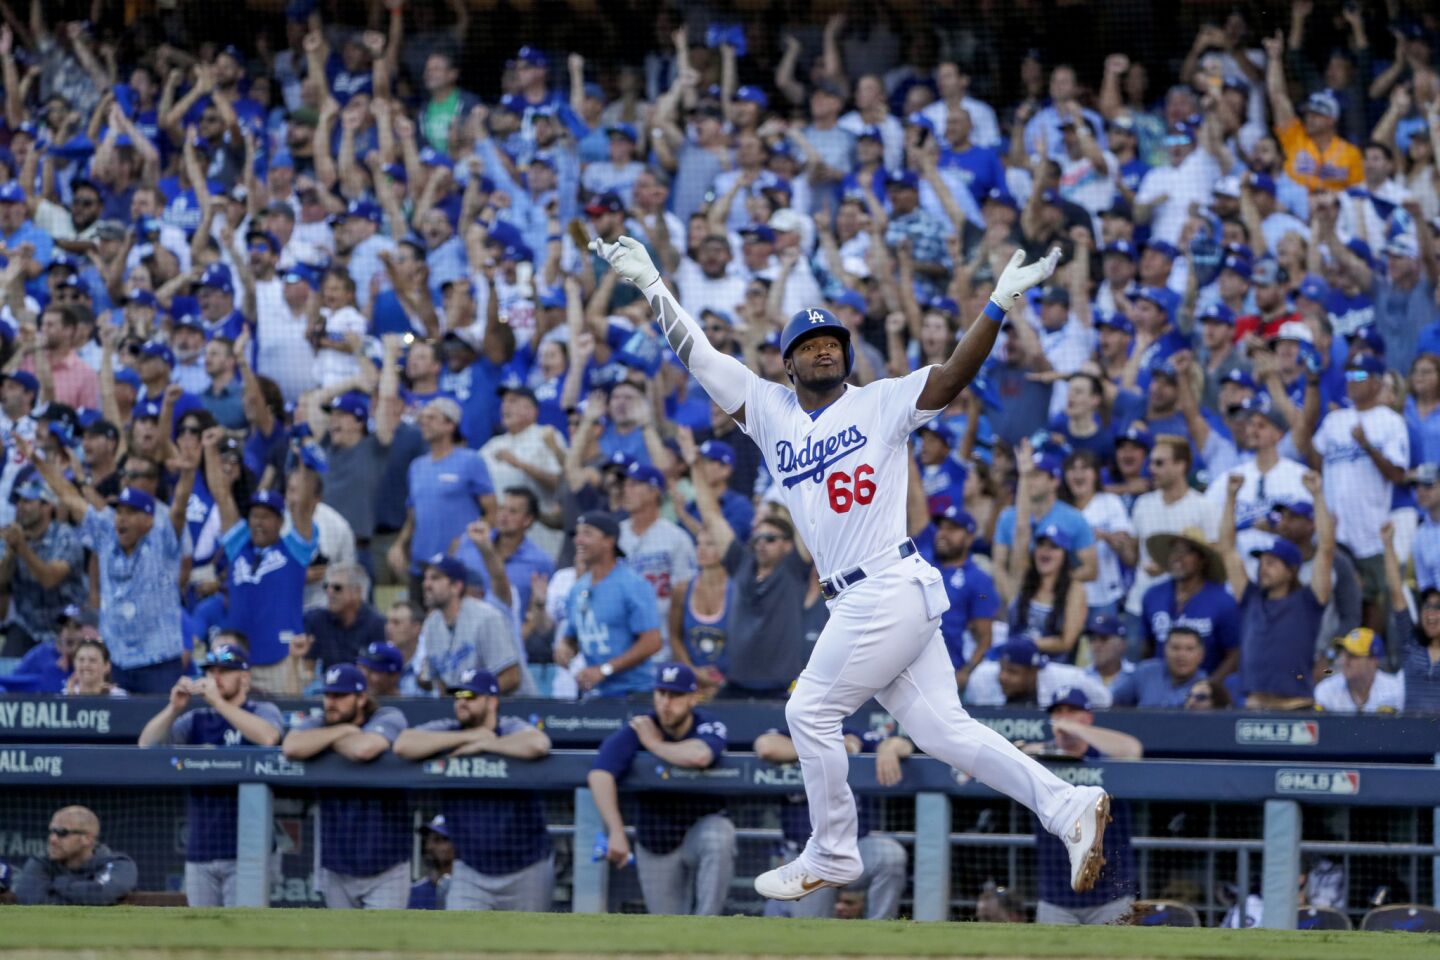 Dodgers Yasiel Puig celebrates while running out an RBI single in the sixth inning.